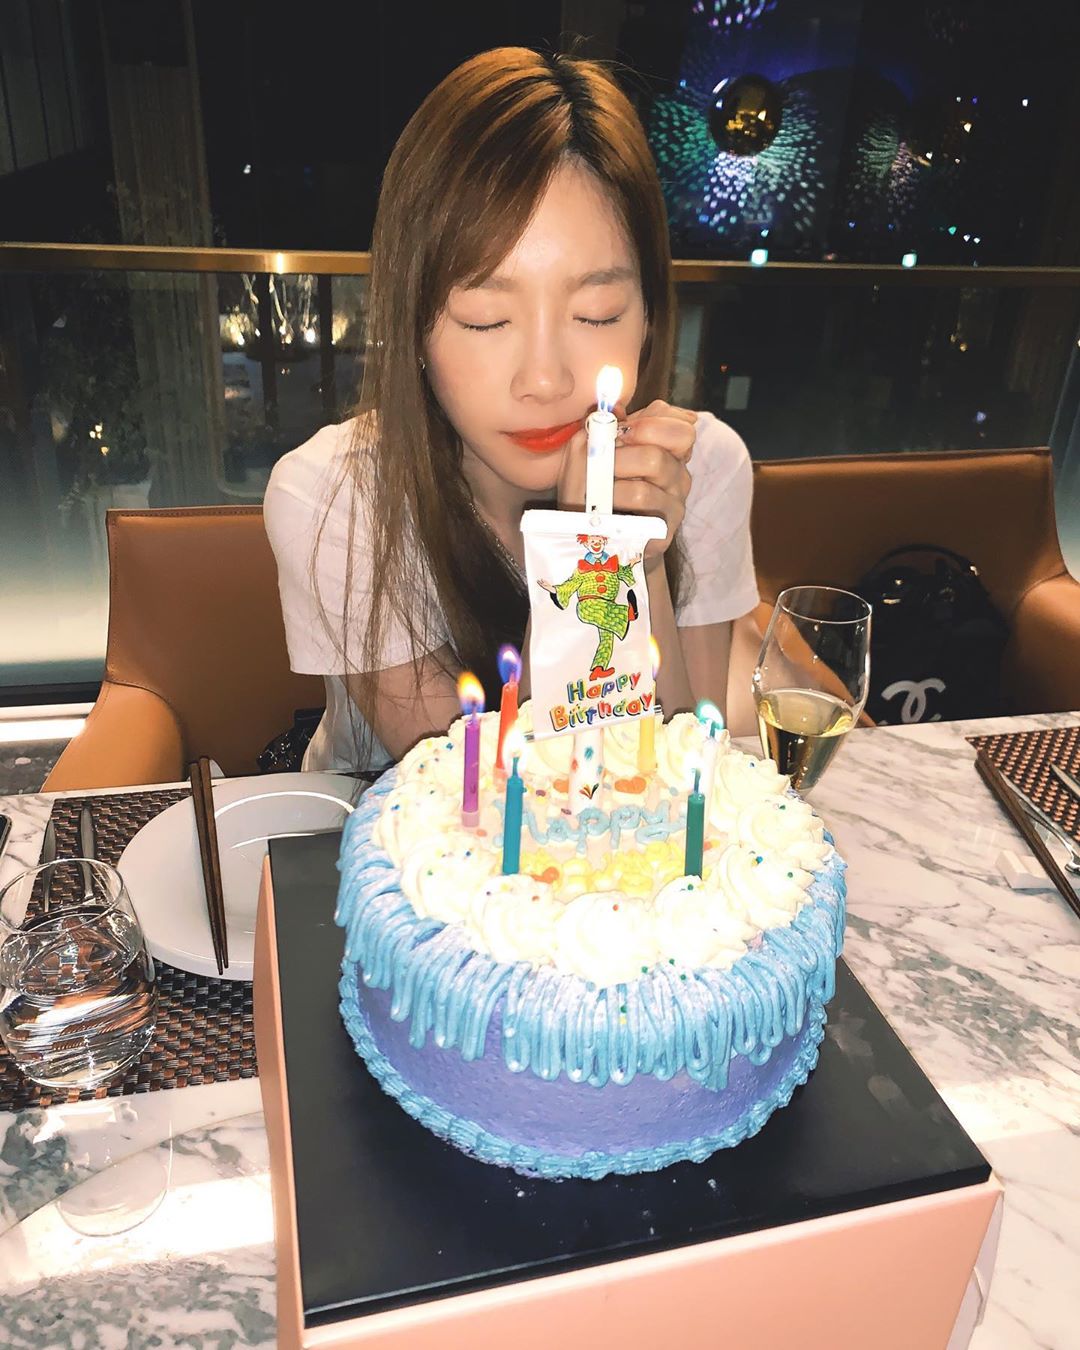 Taeyeon, birthday party photo released "Happy birthday party in advance", Seohyun "I love you"